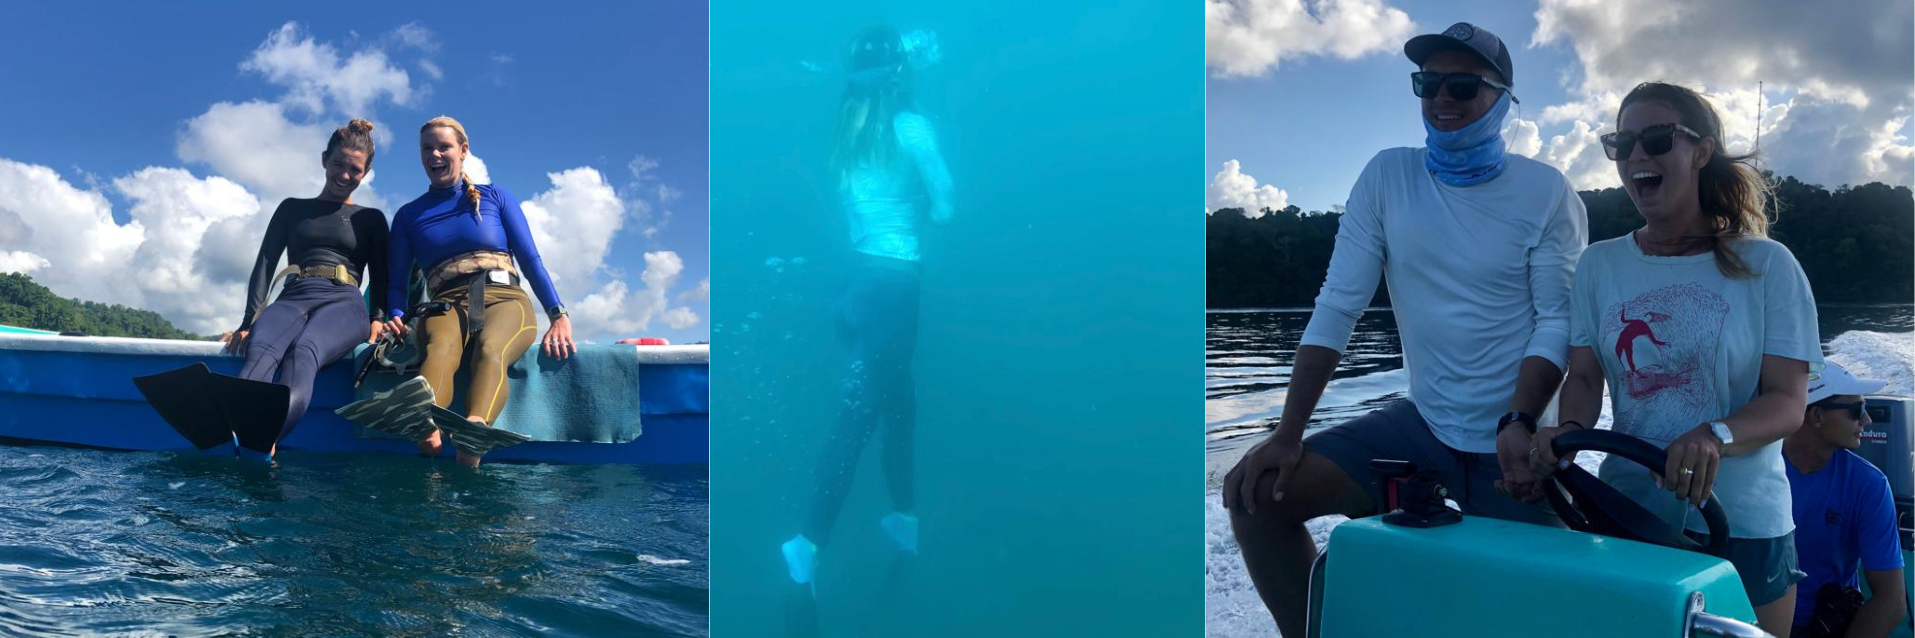 Surf With Amigas coaches free diving 